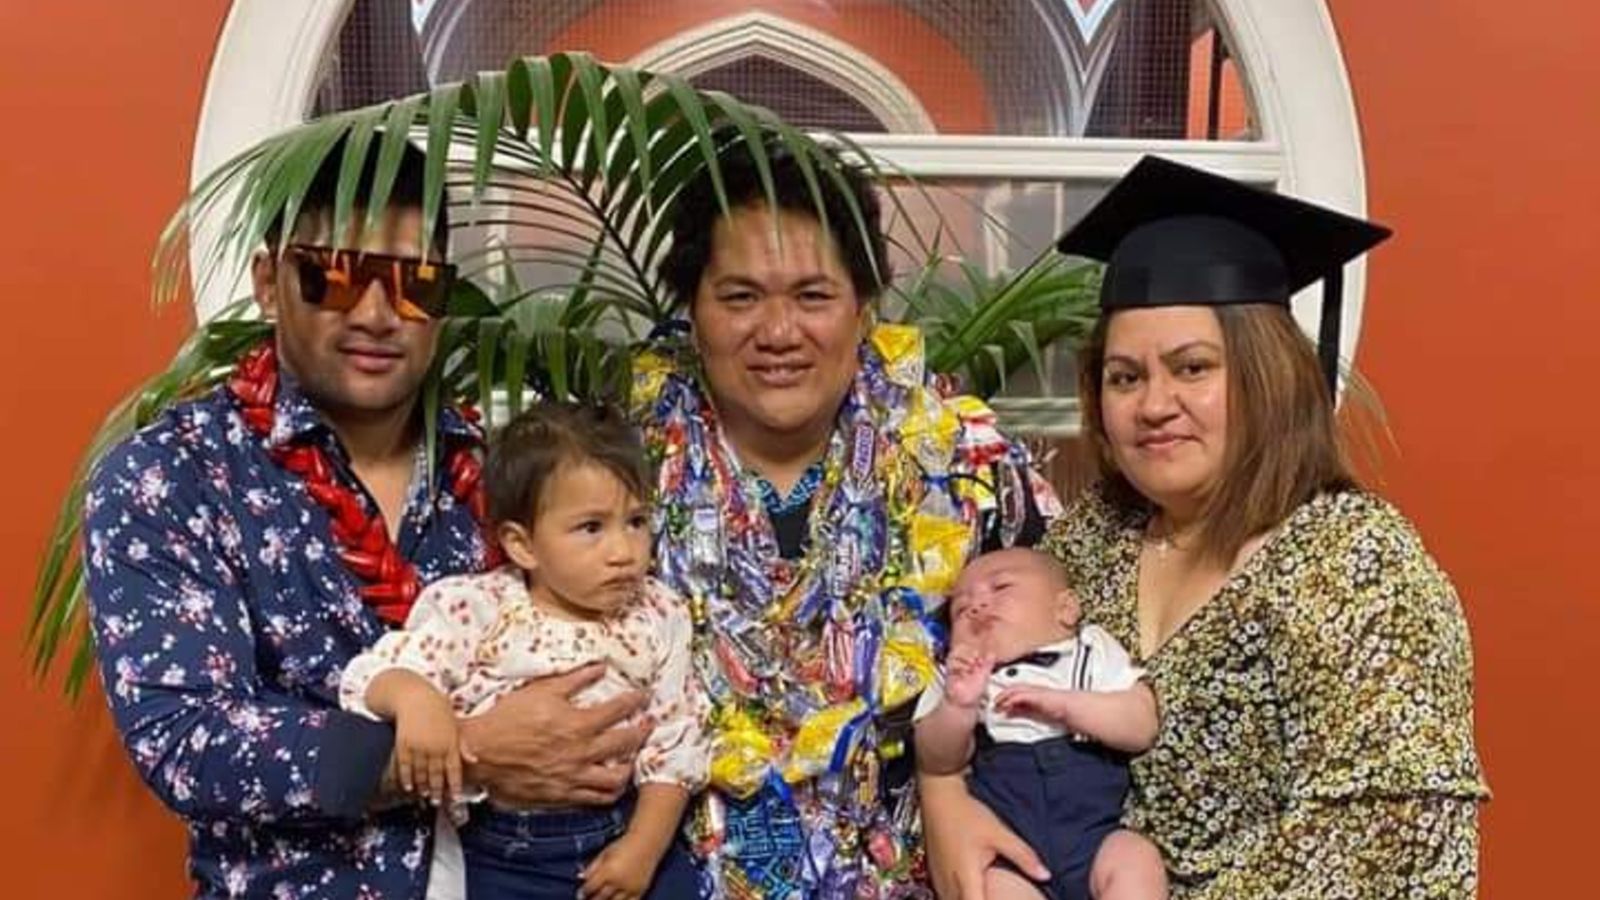 Samoan person standing with family at graduation